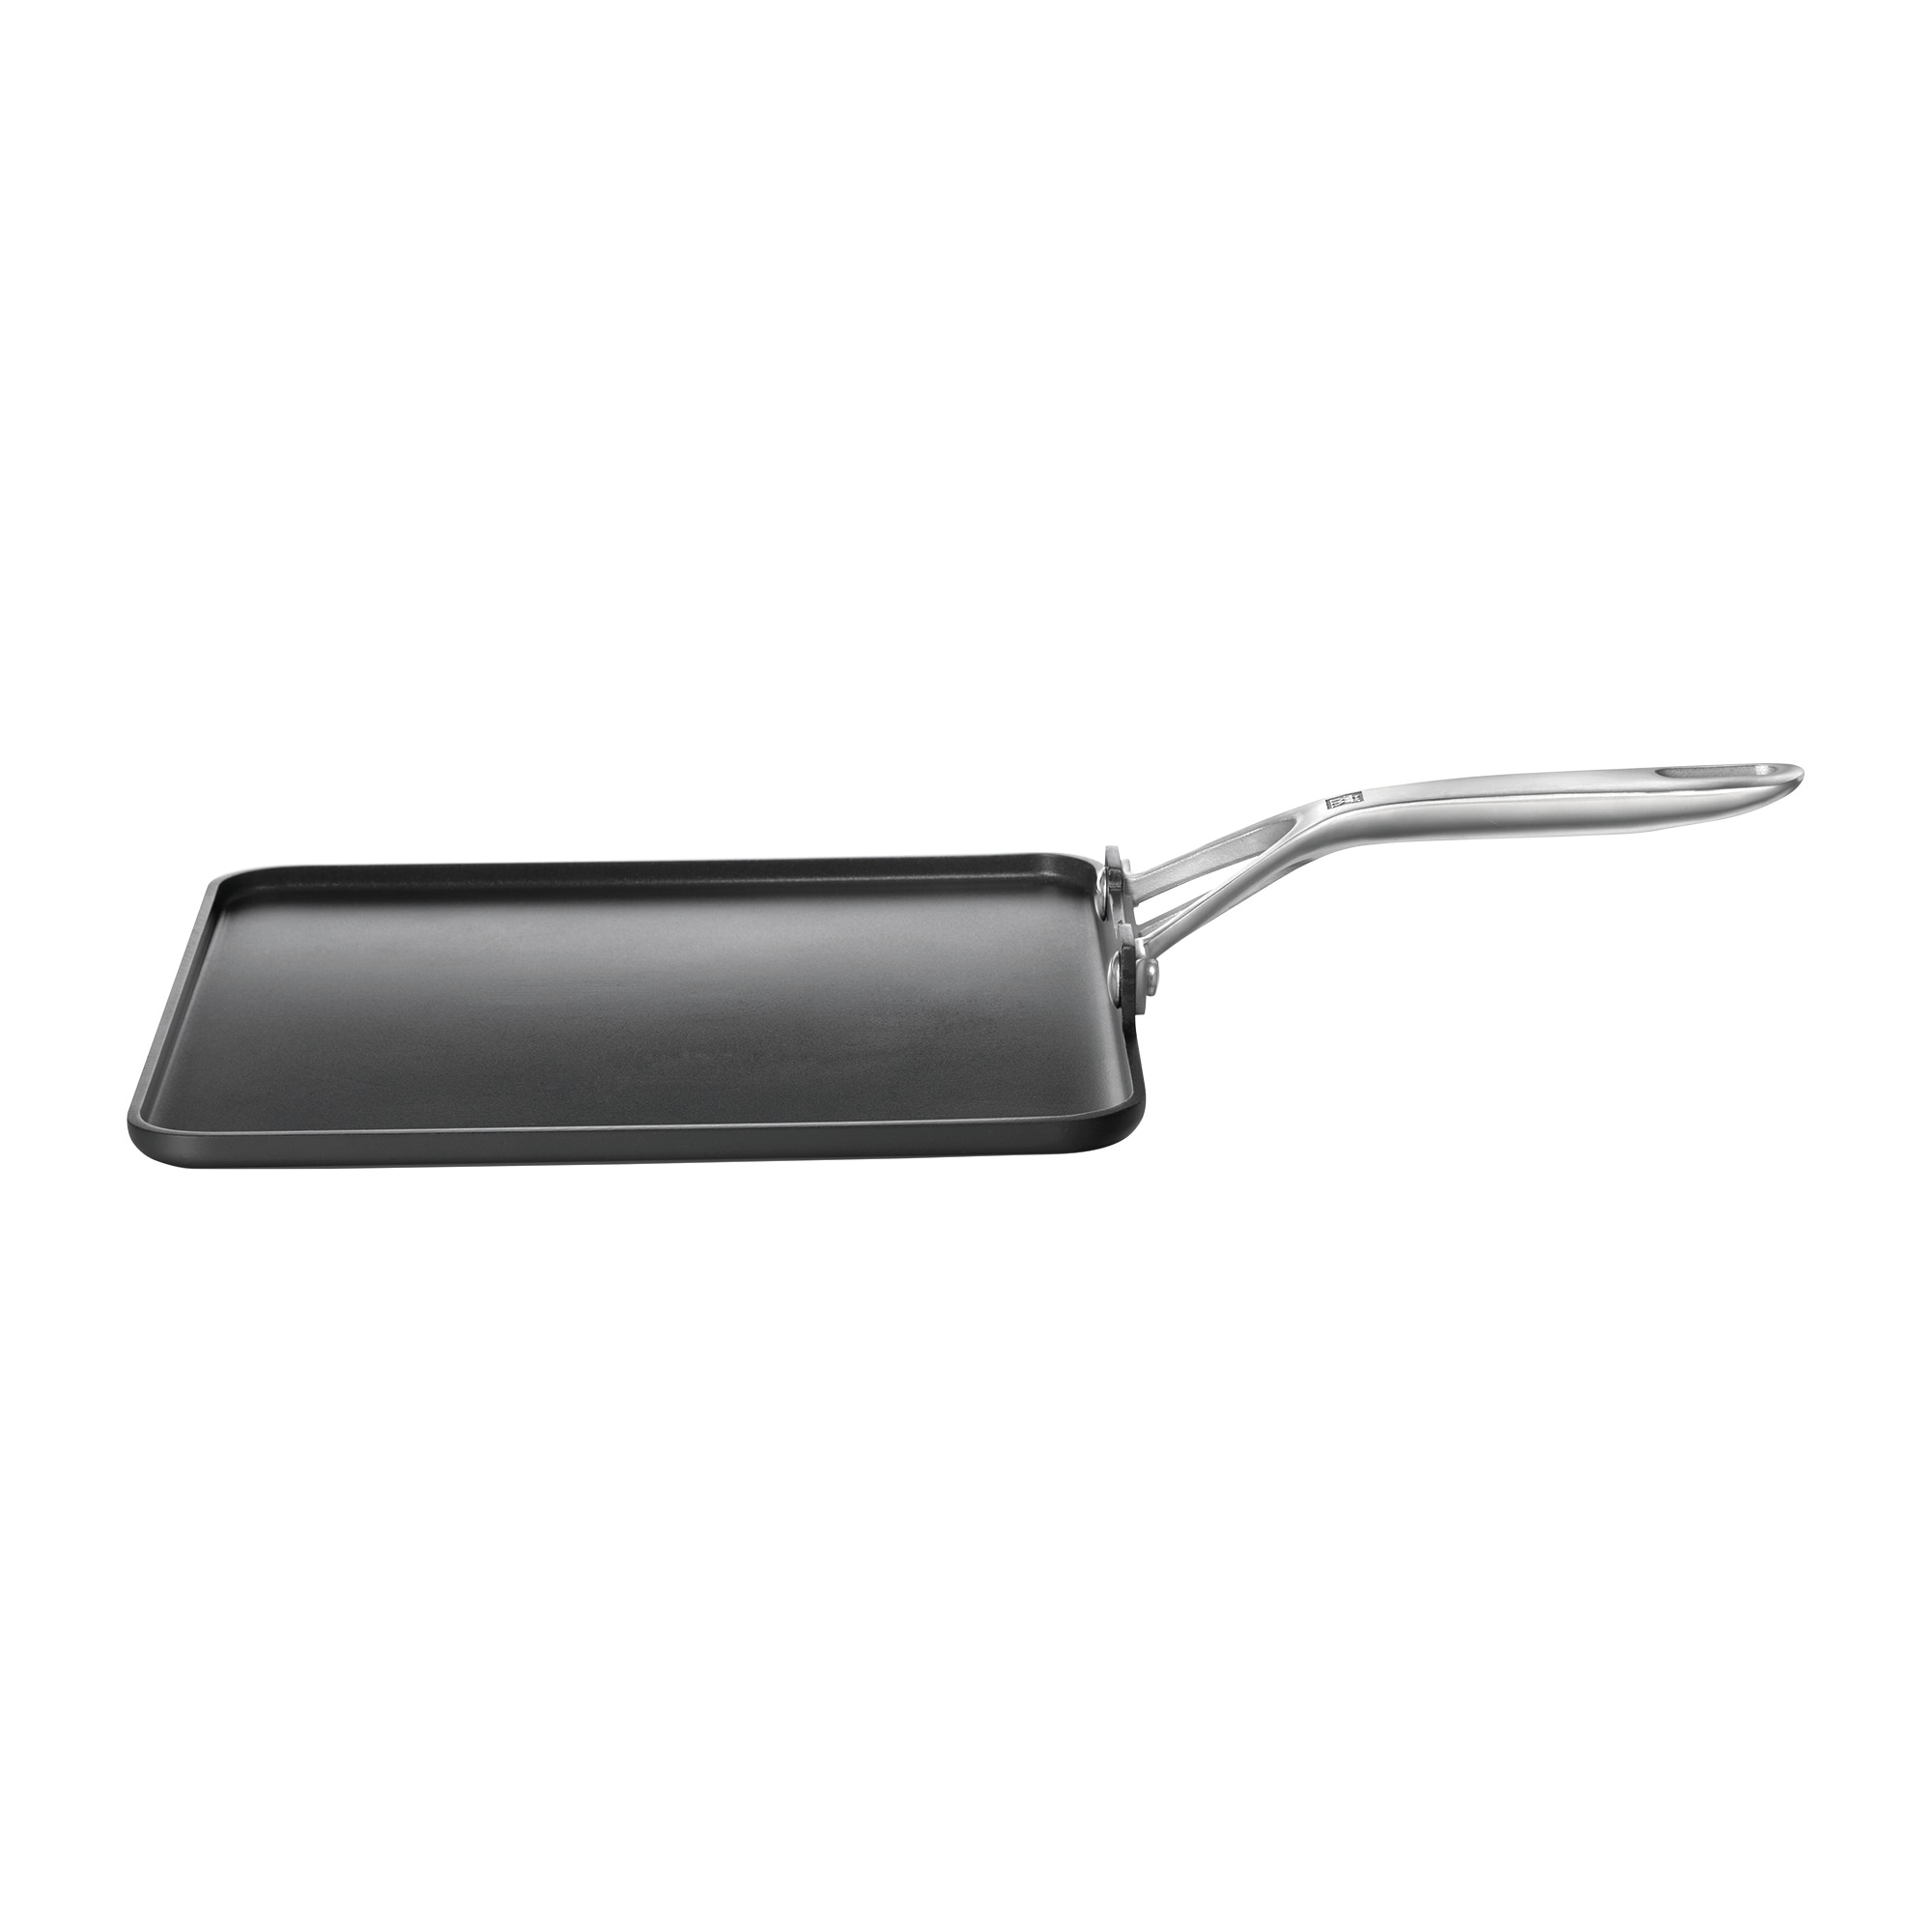 ZWILLING Motion Hard Anodized Aluminum Nonstick Fry Pan - Bed Bath